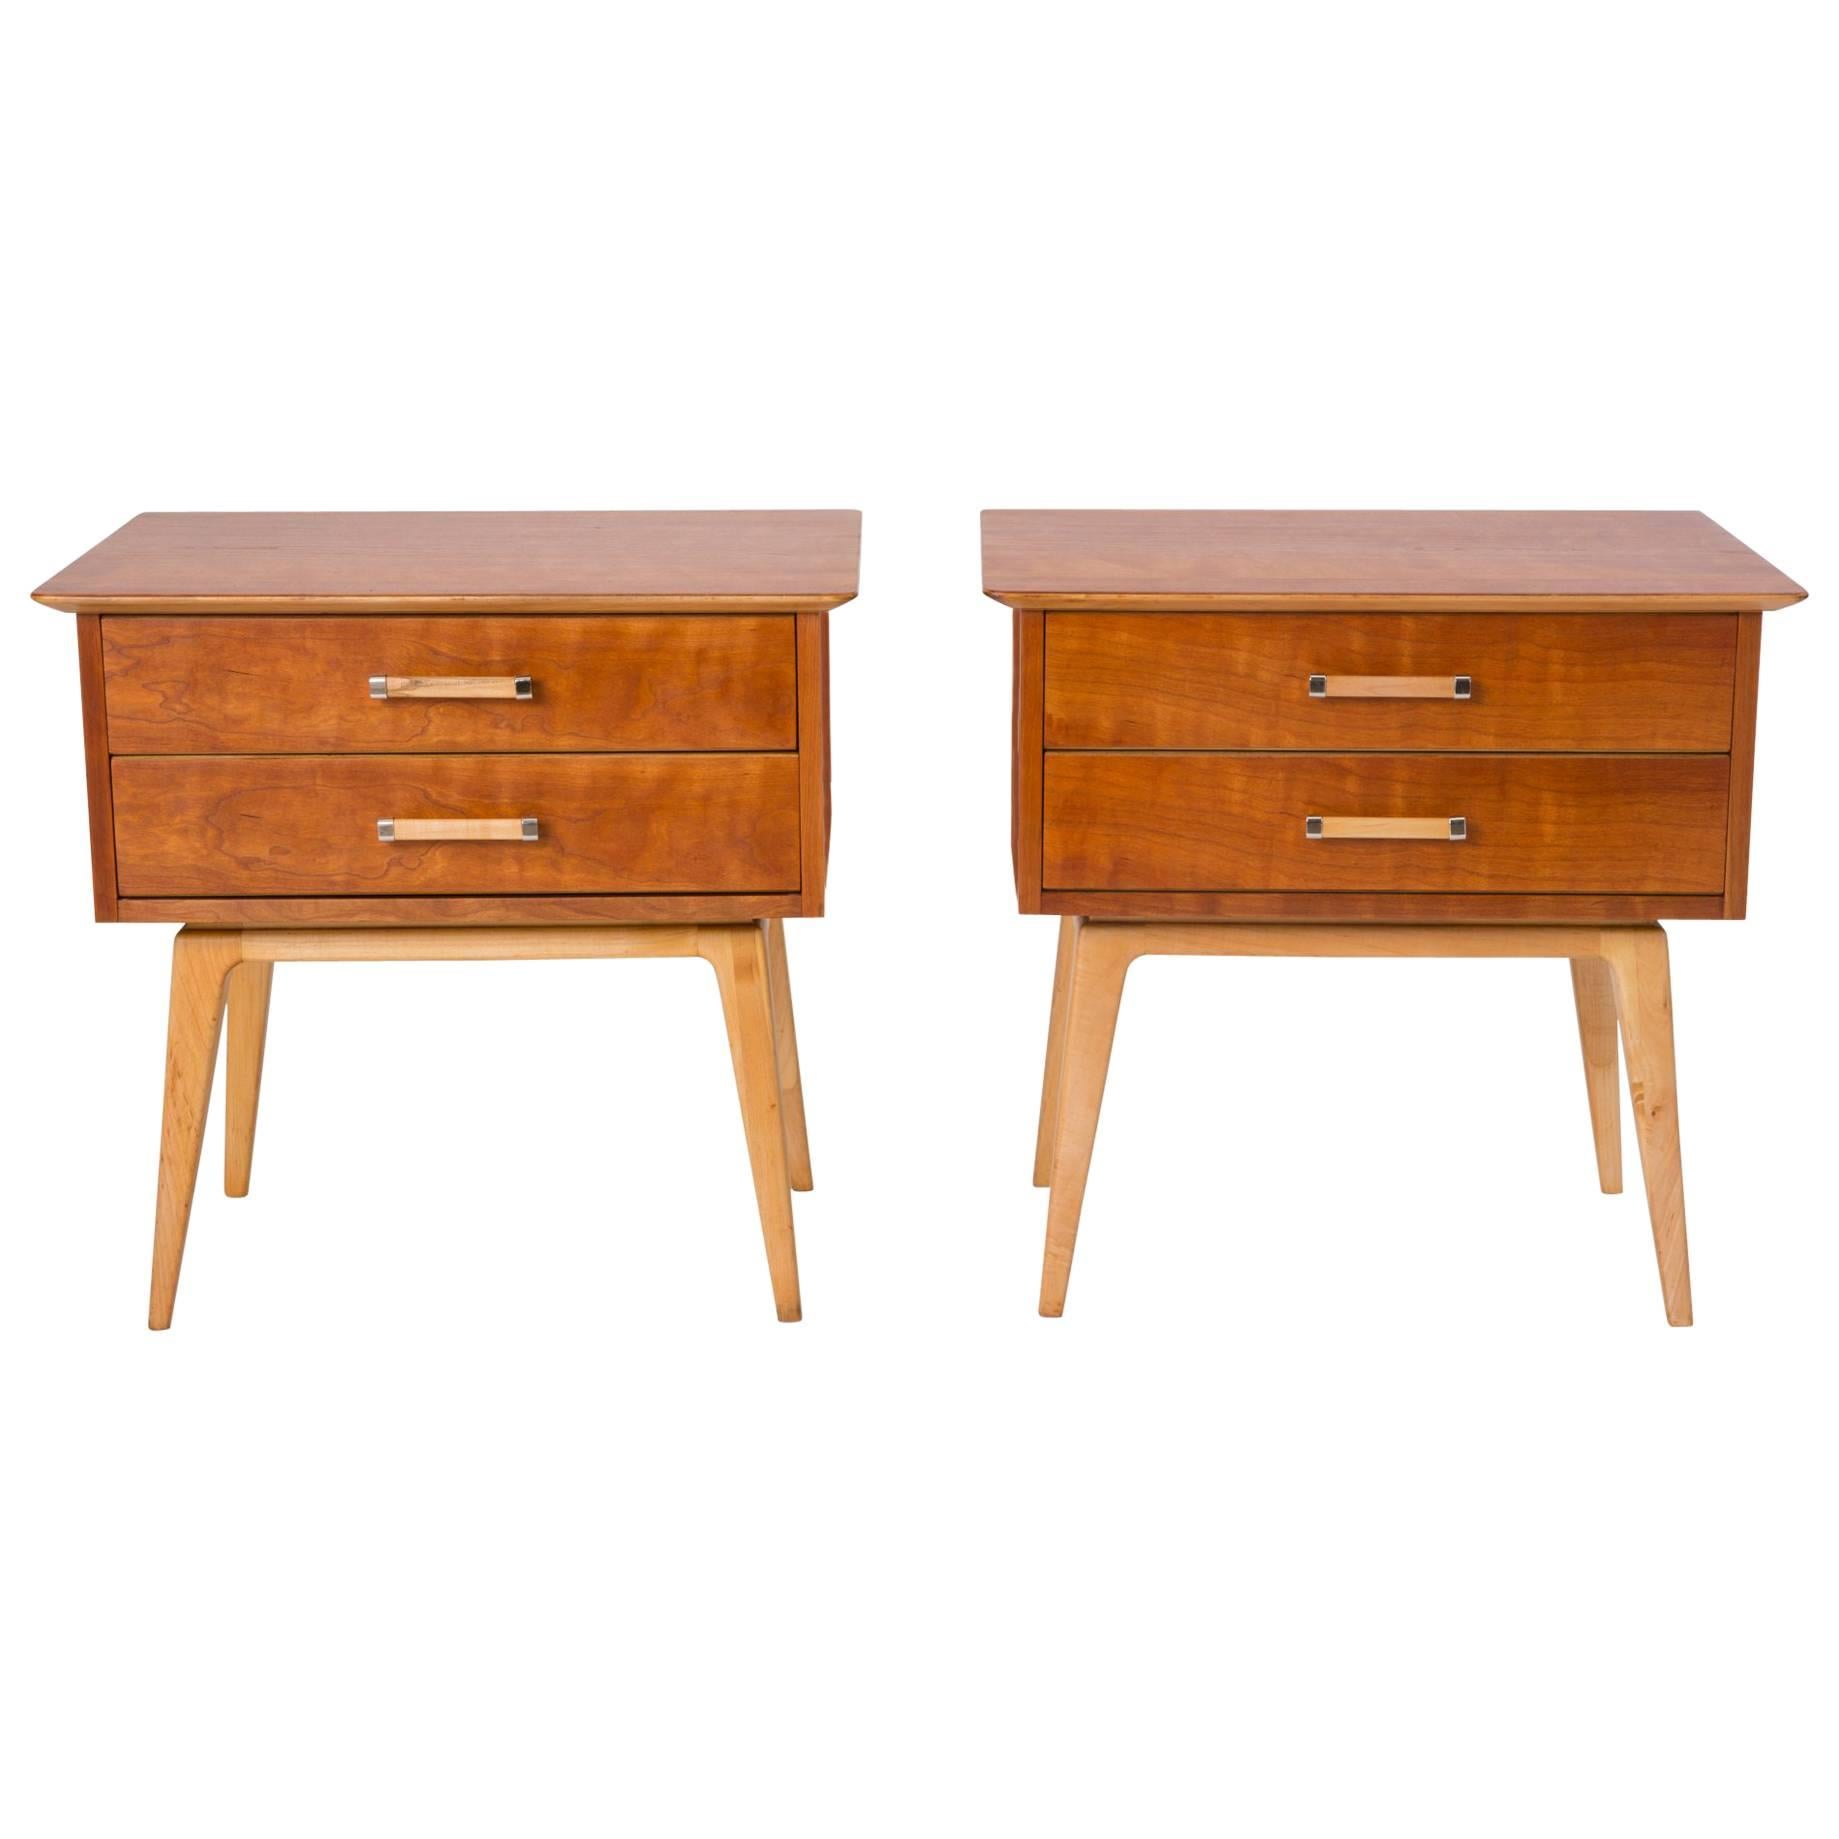 Pair of Cherrywood Nightstands by Renzo Rutili for Johnson Furniture